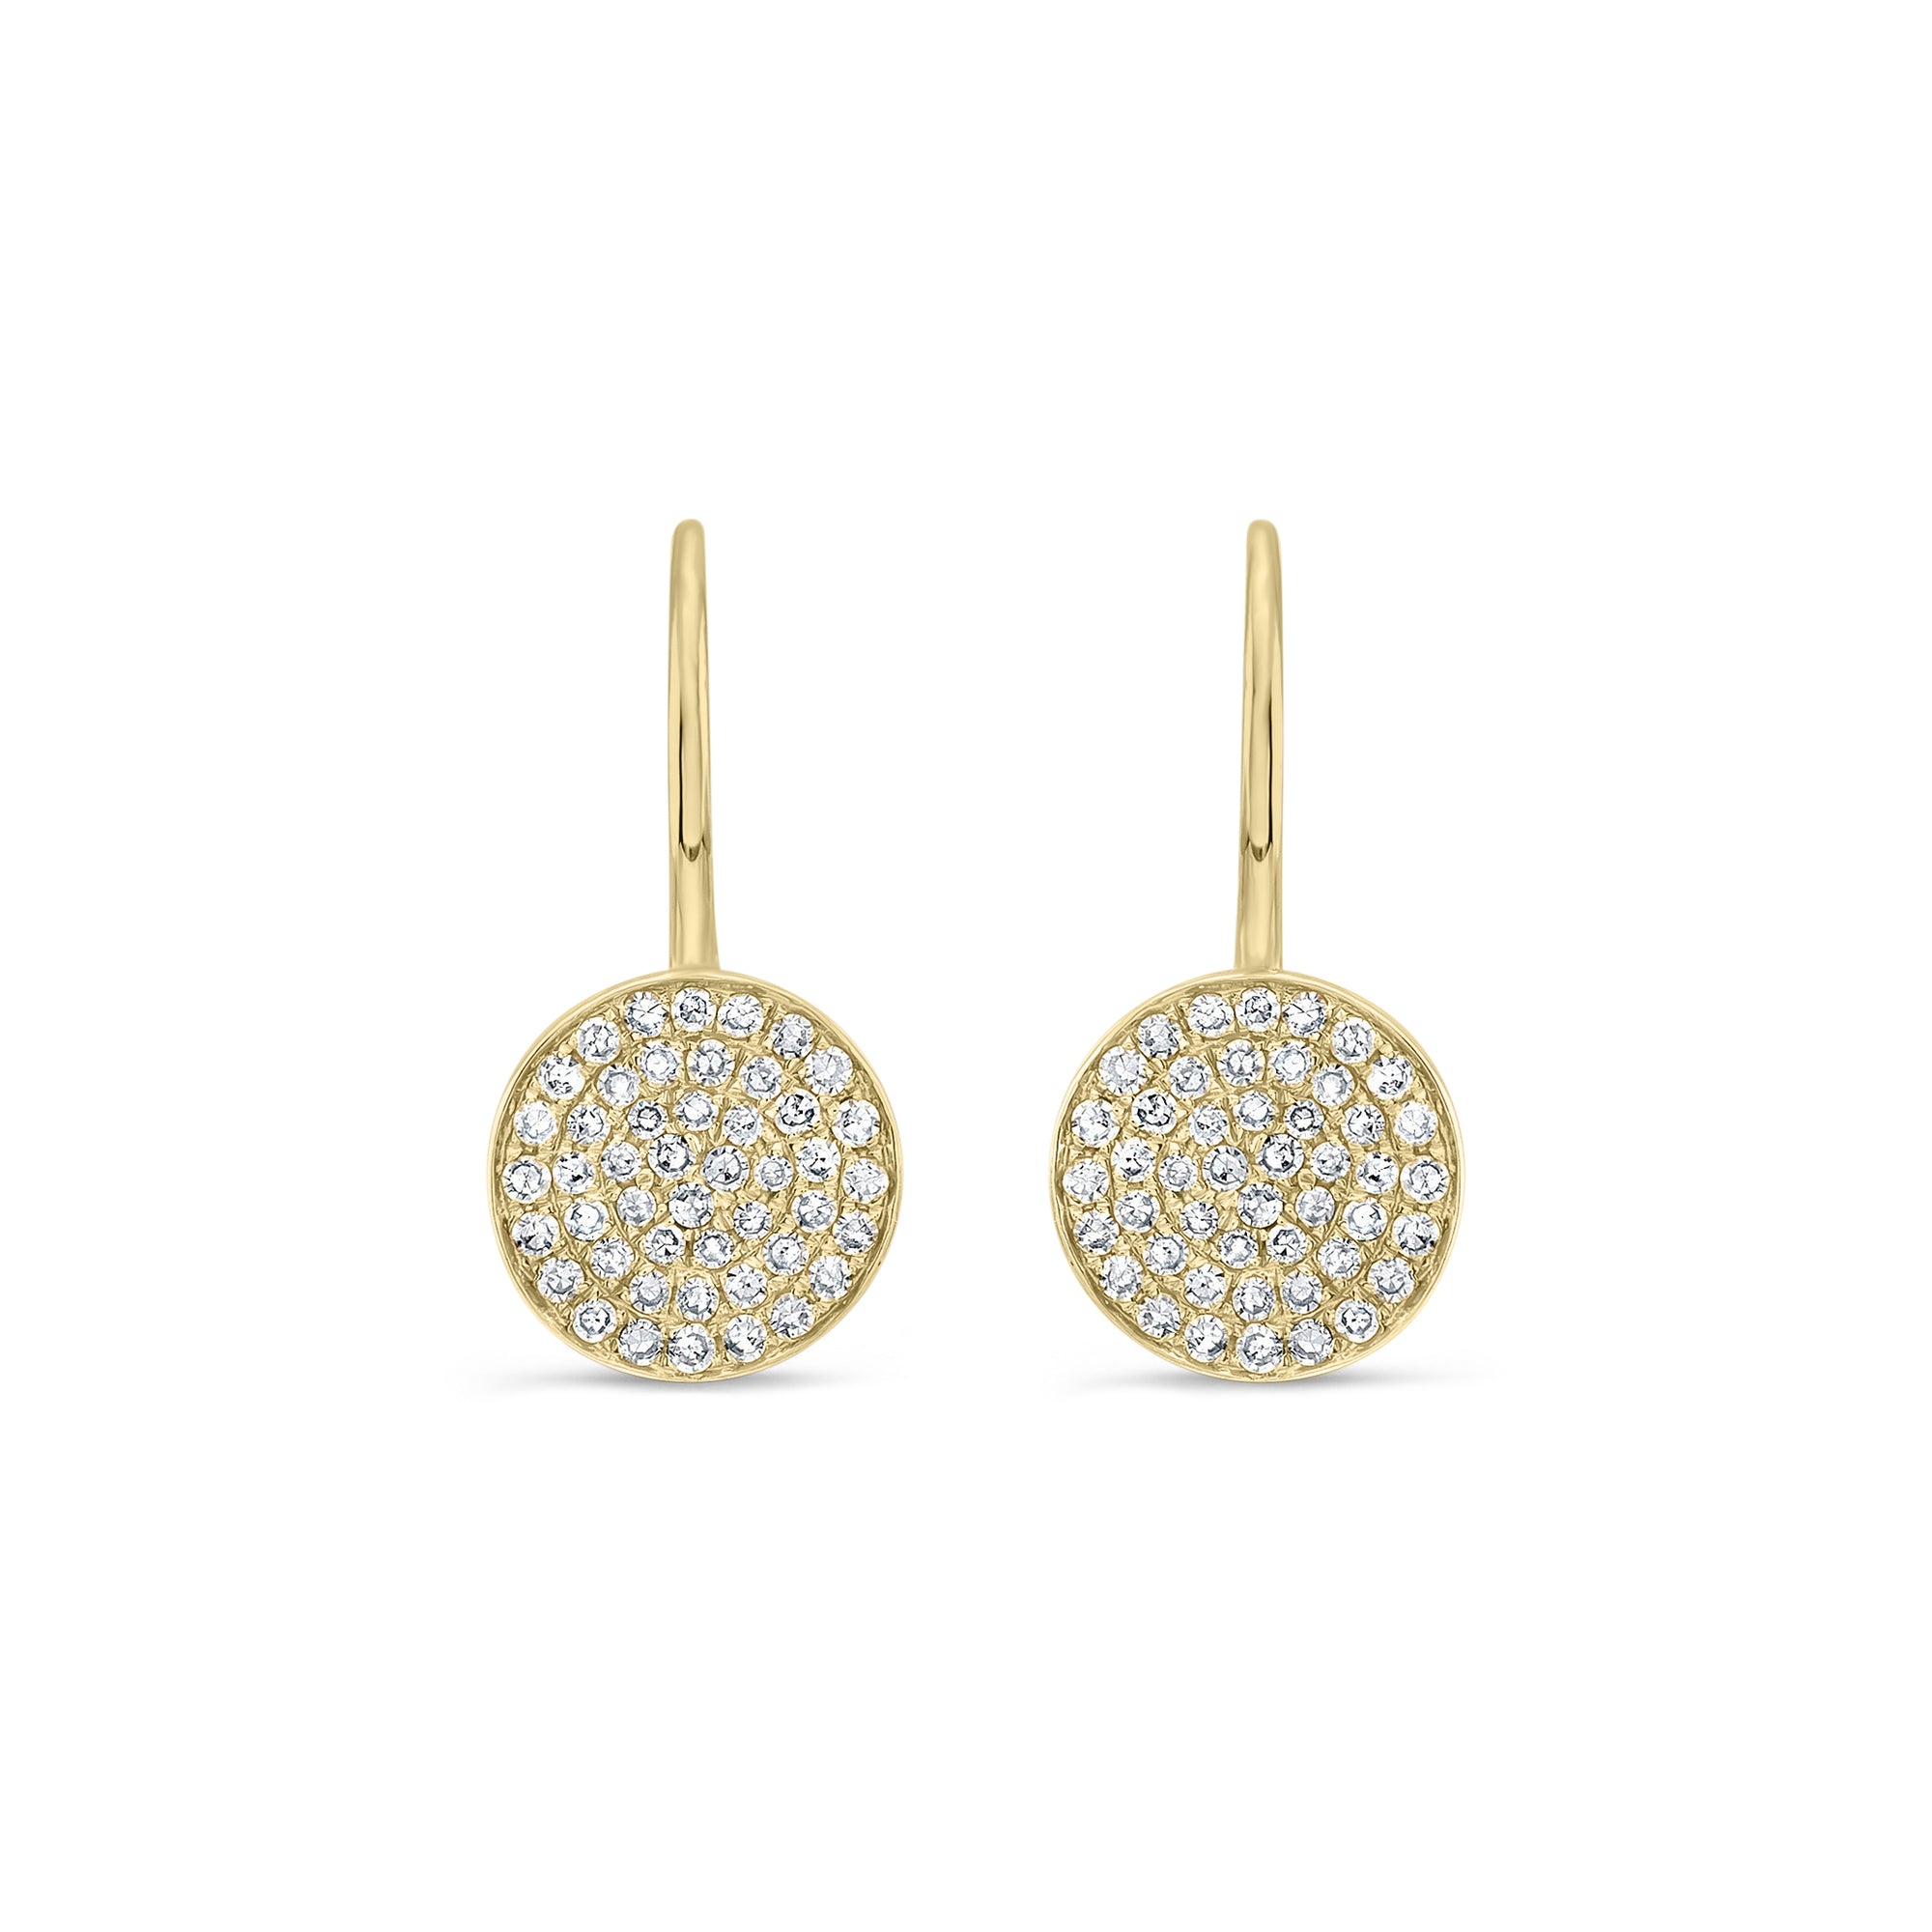 Pave Diamond Disc Earrings  -14K yellow gold weighing 1.79 grams  -94 round diamonds weighing 0.37 carats